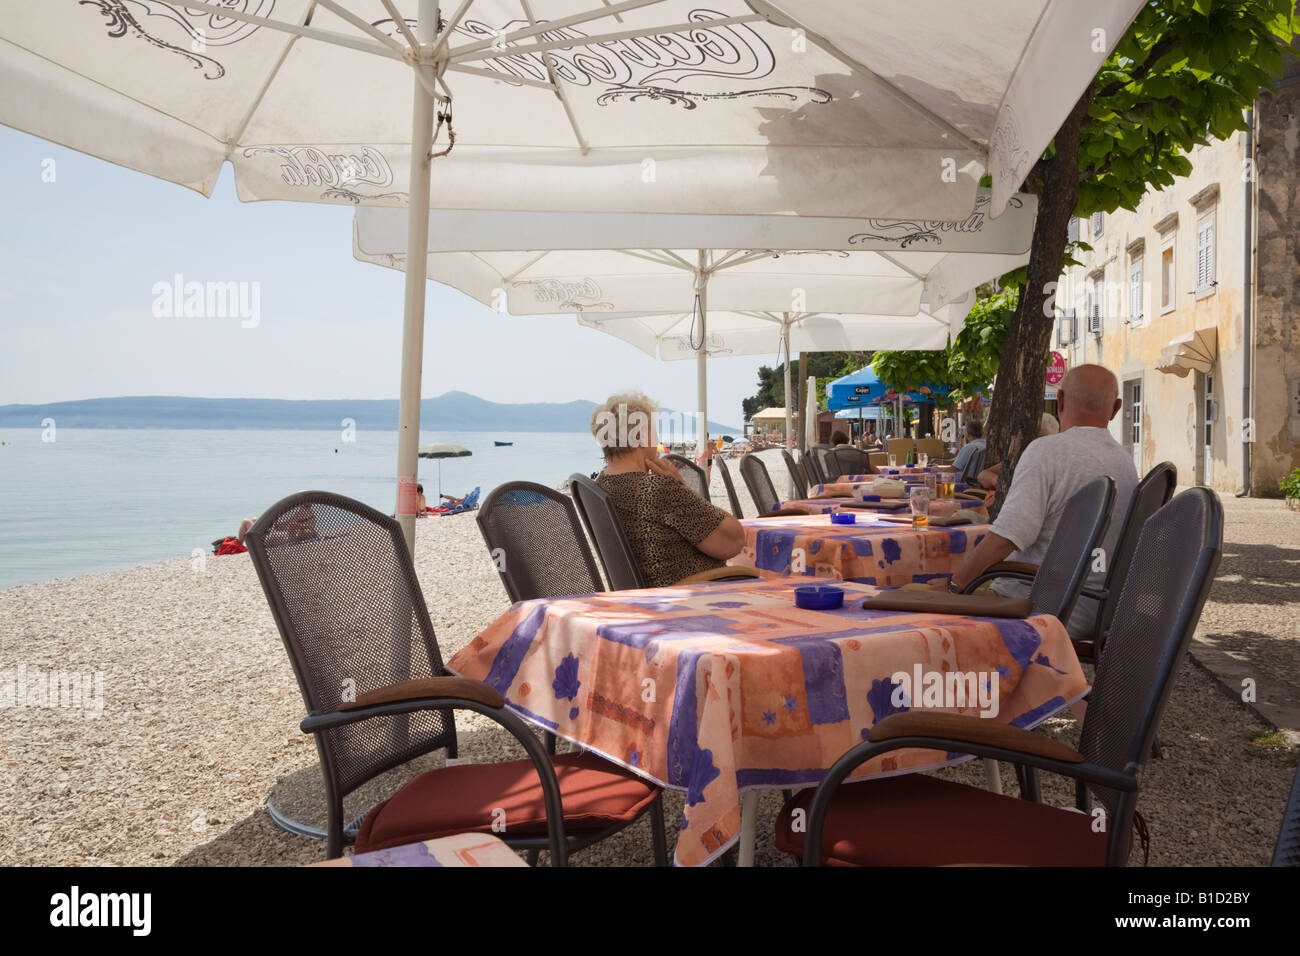 Moscenicka Draga Istria Croatia Street cafe with people sitting at tables with umbrellas outside on seafront by beach Stock Photo